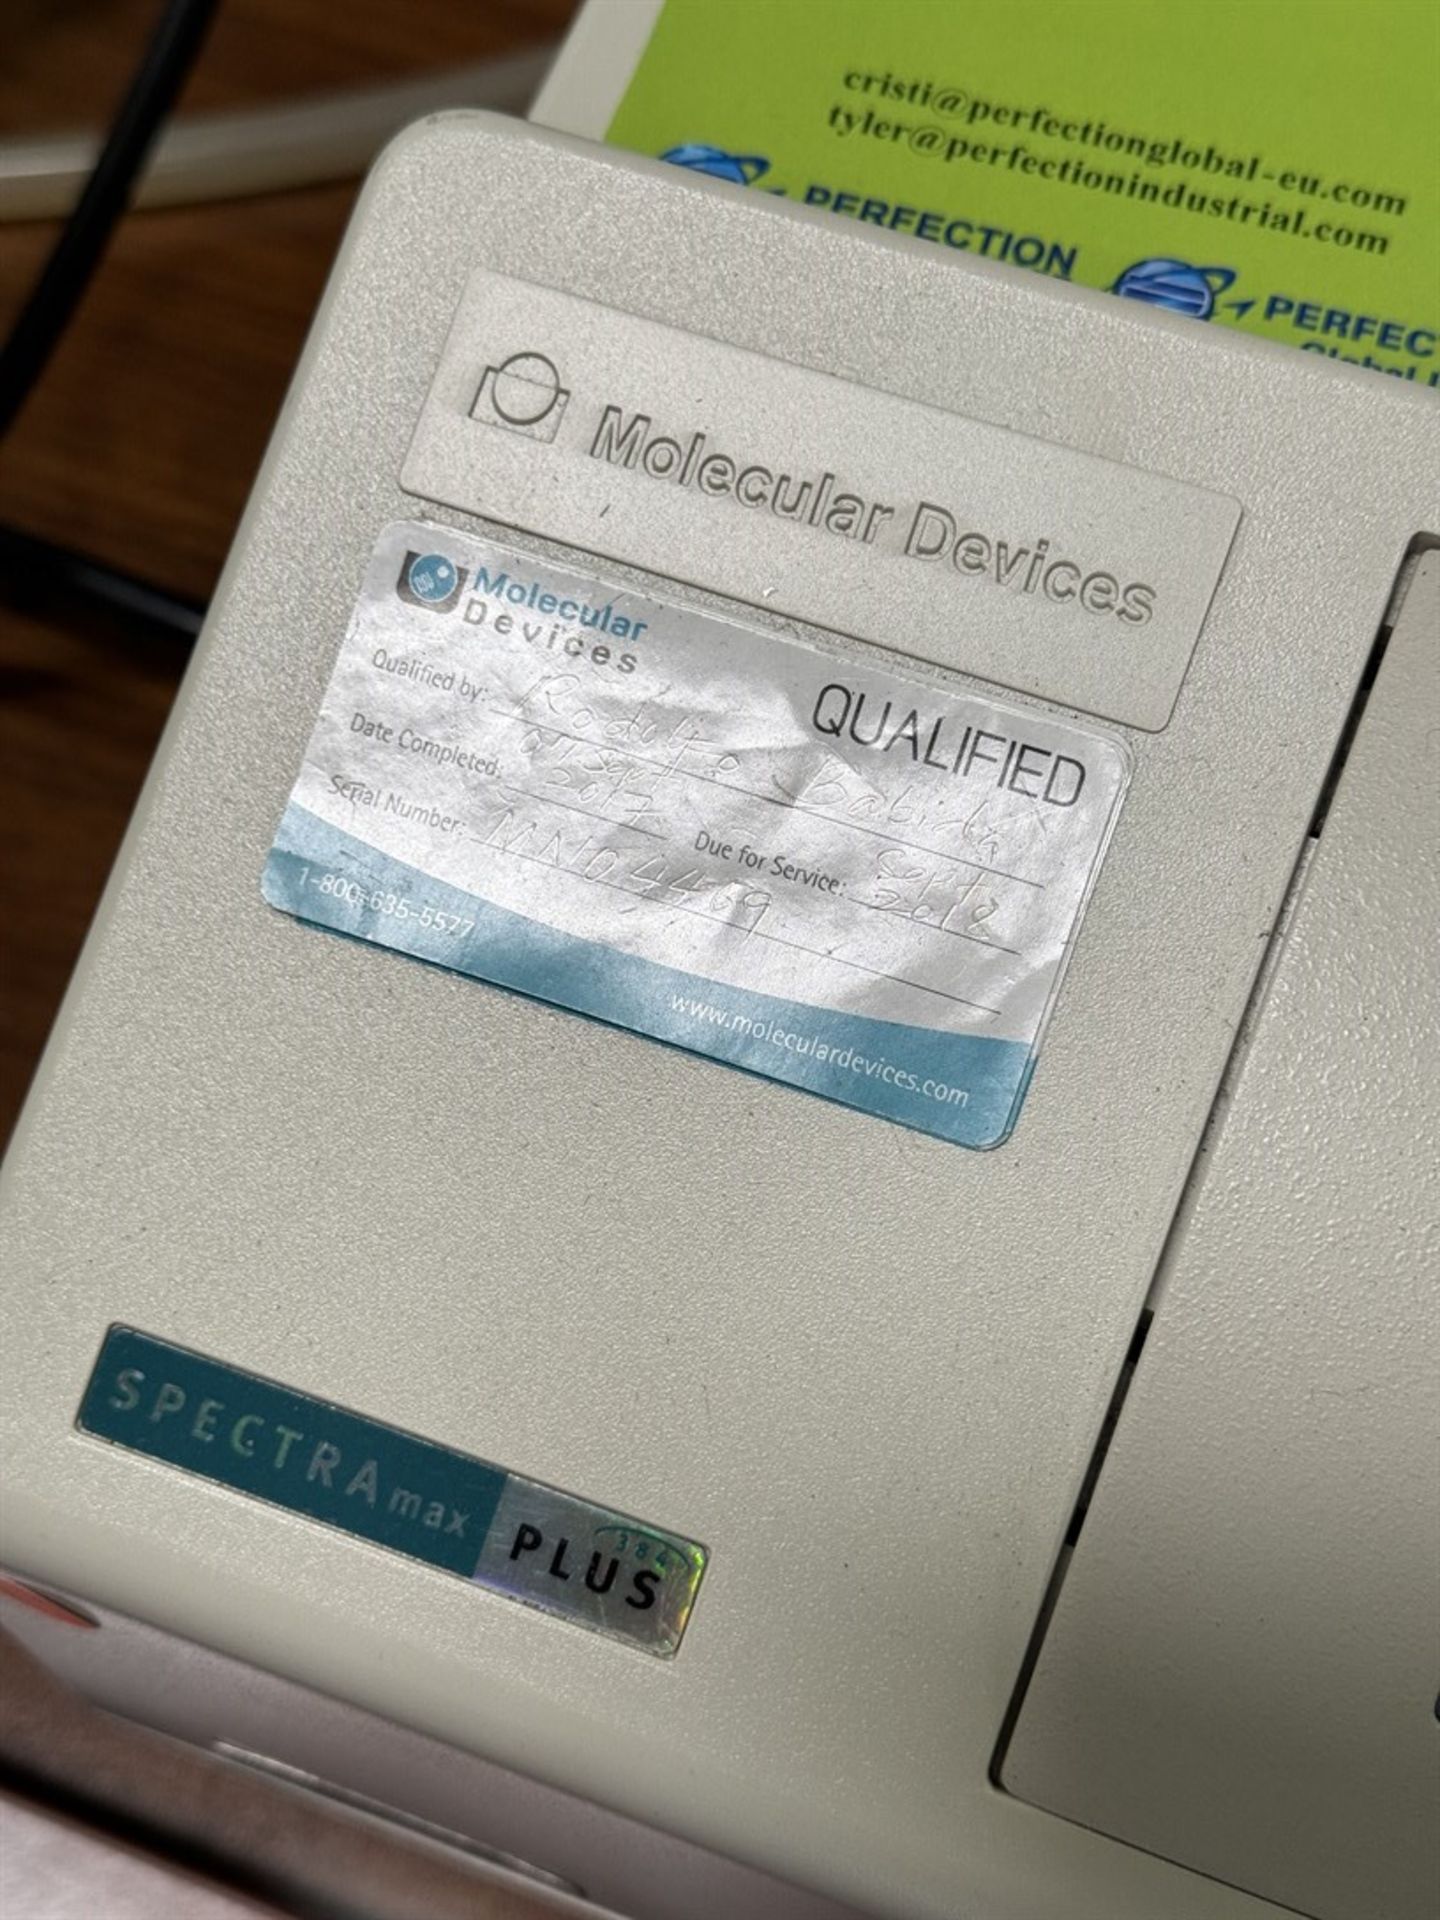 MOLECULAR DEVICES Spectra Max 384 Plus Microplate Spectrophotometer, s/n MN04469 - Image 3 of 4